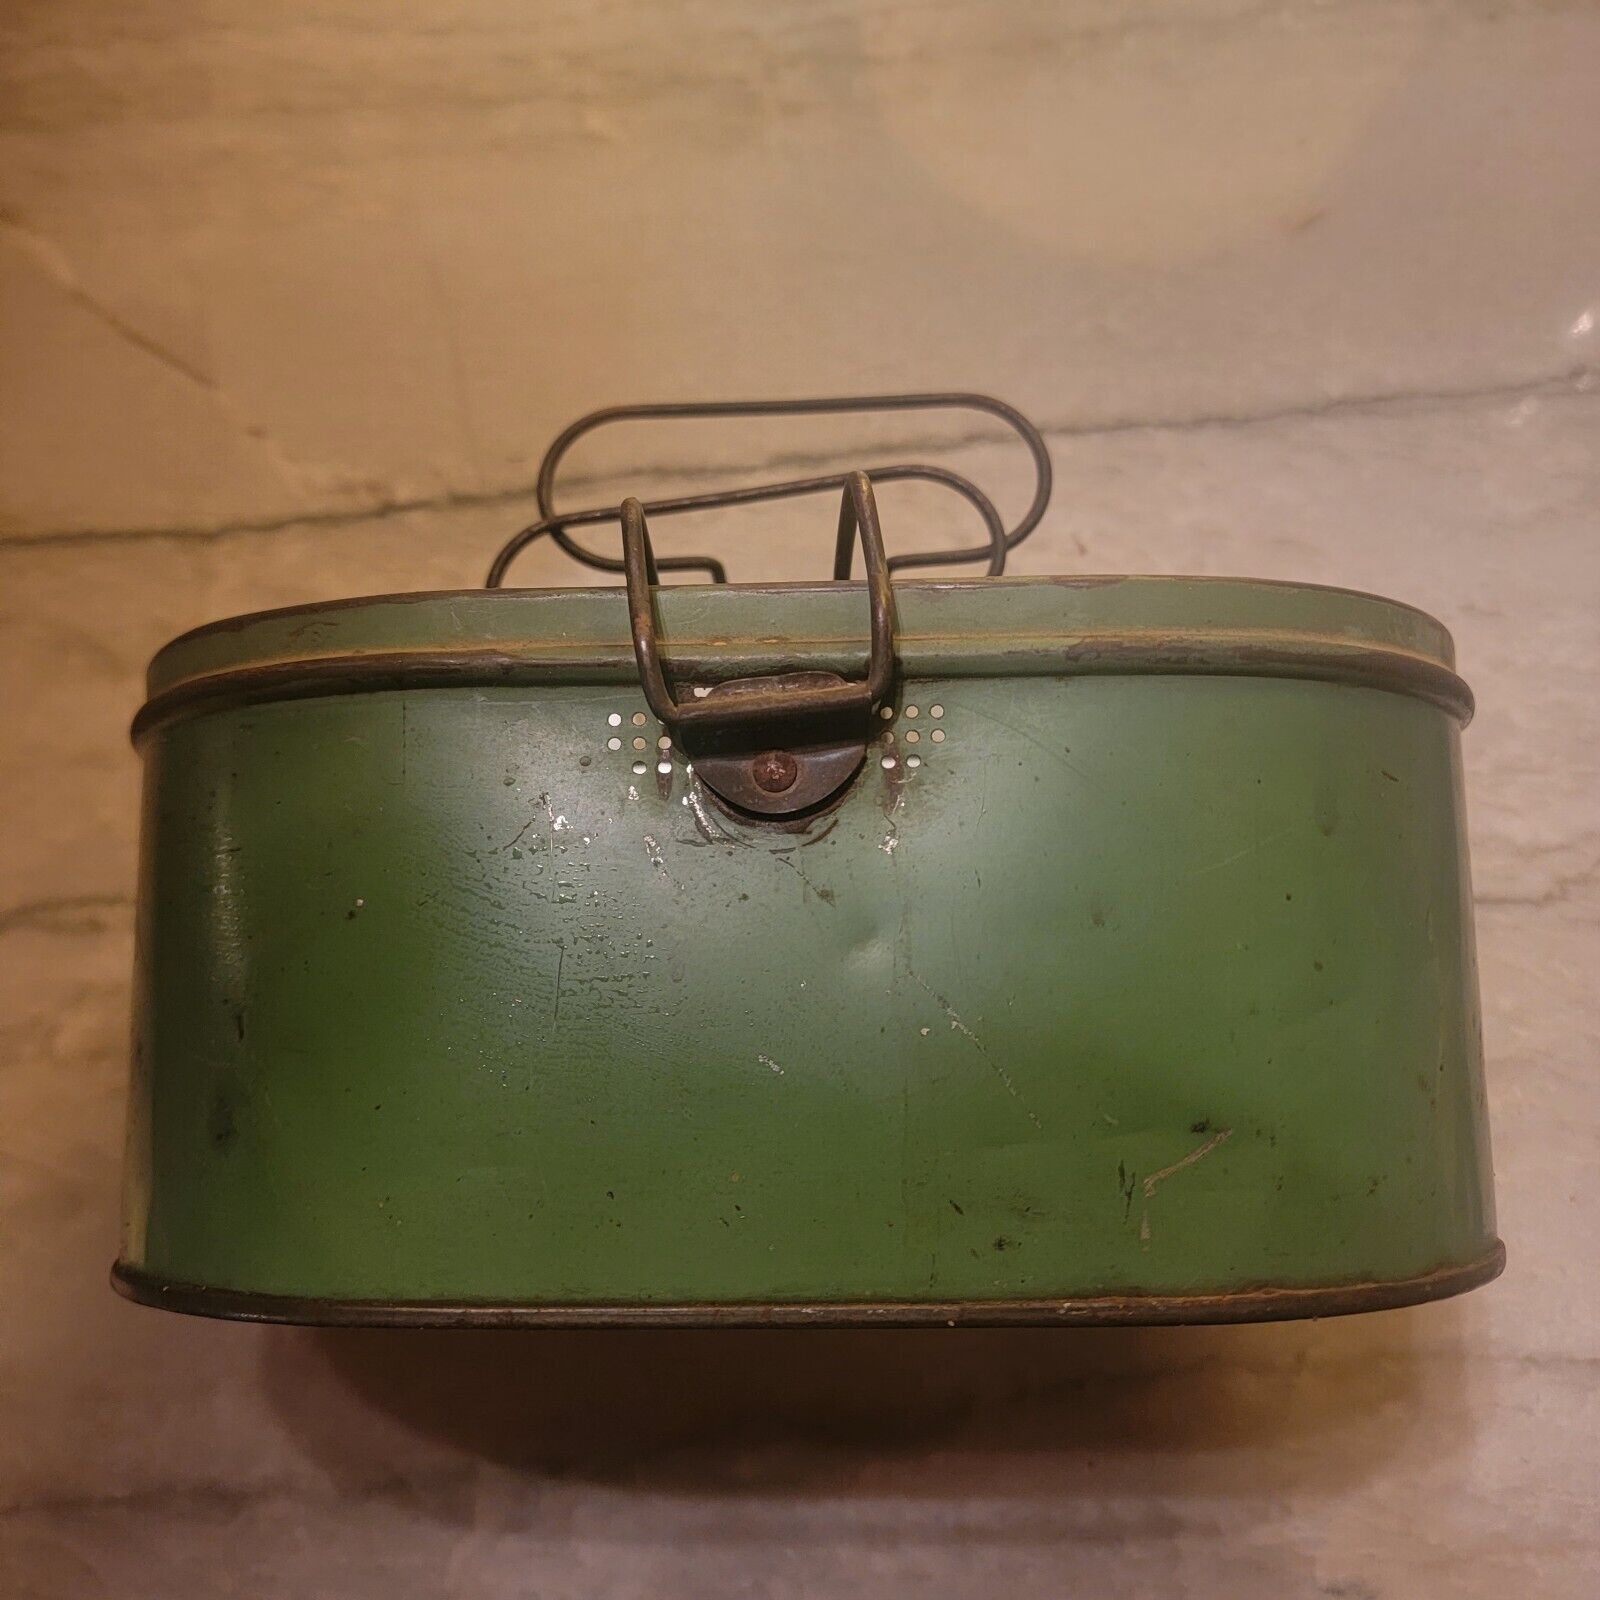 Vintage Handy Oval Lunch Box, Patent No. 1737249 1930's Lunch Box, Green Color